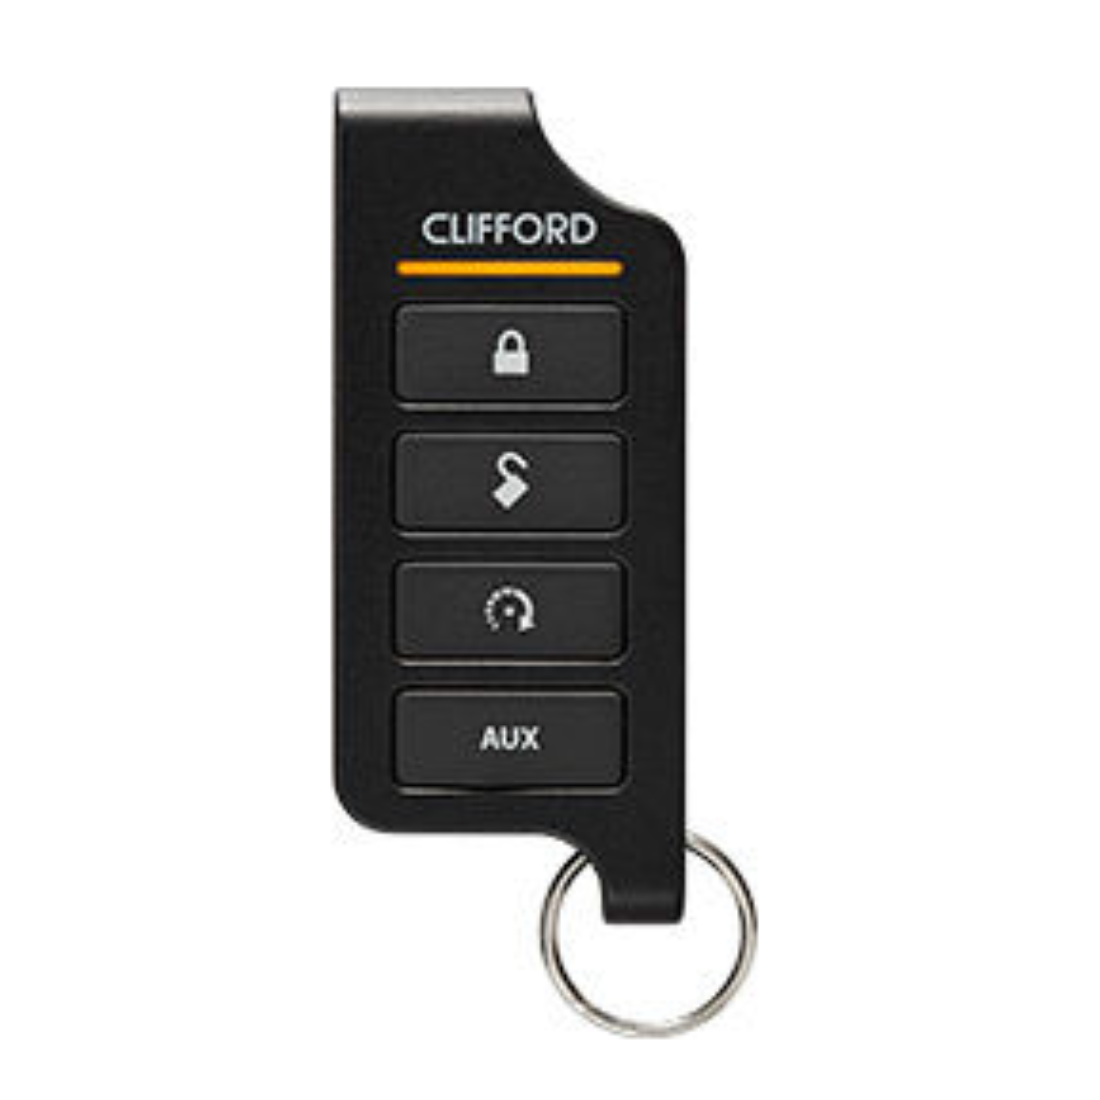 Clifford 7656X 1-Way 4-Button Up to 1/2 Mile Range Replacement Car Remote